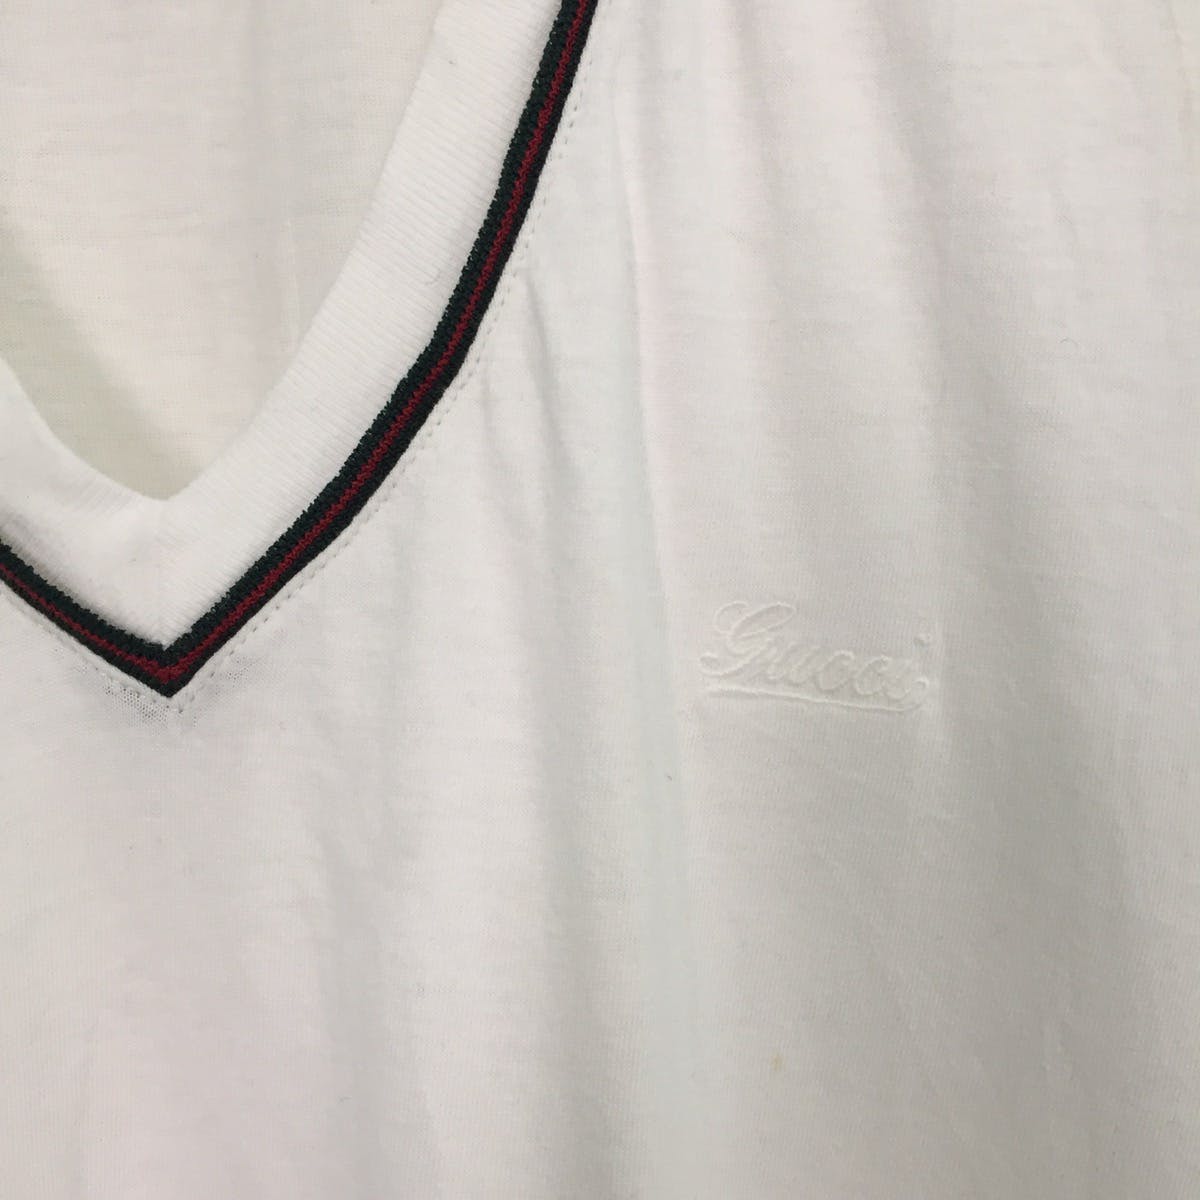 Gucci White Tee V Neck MADE IN ITALY - 3